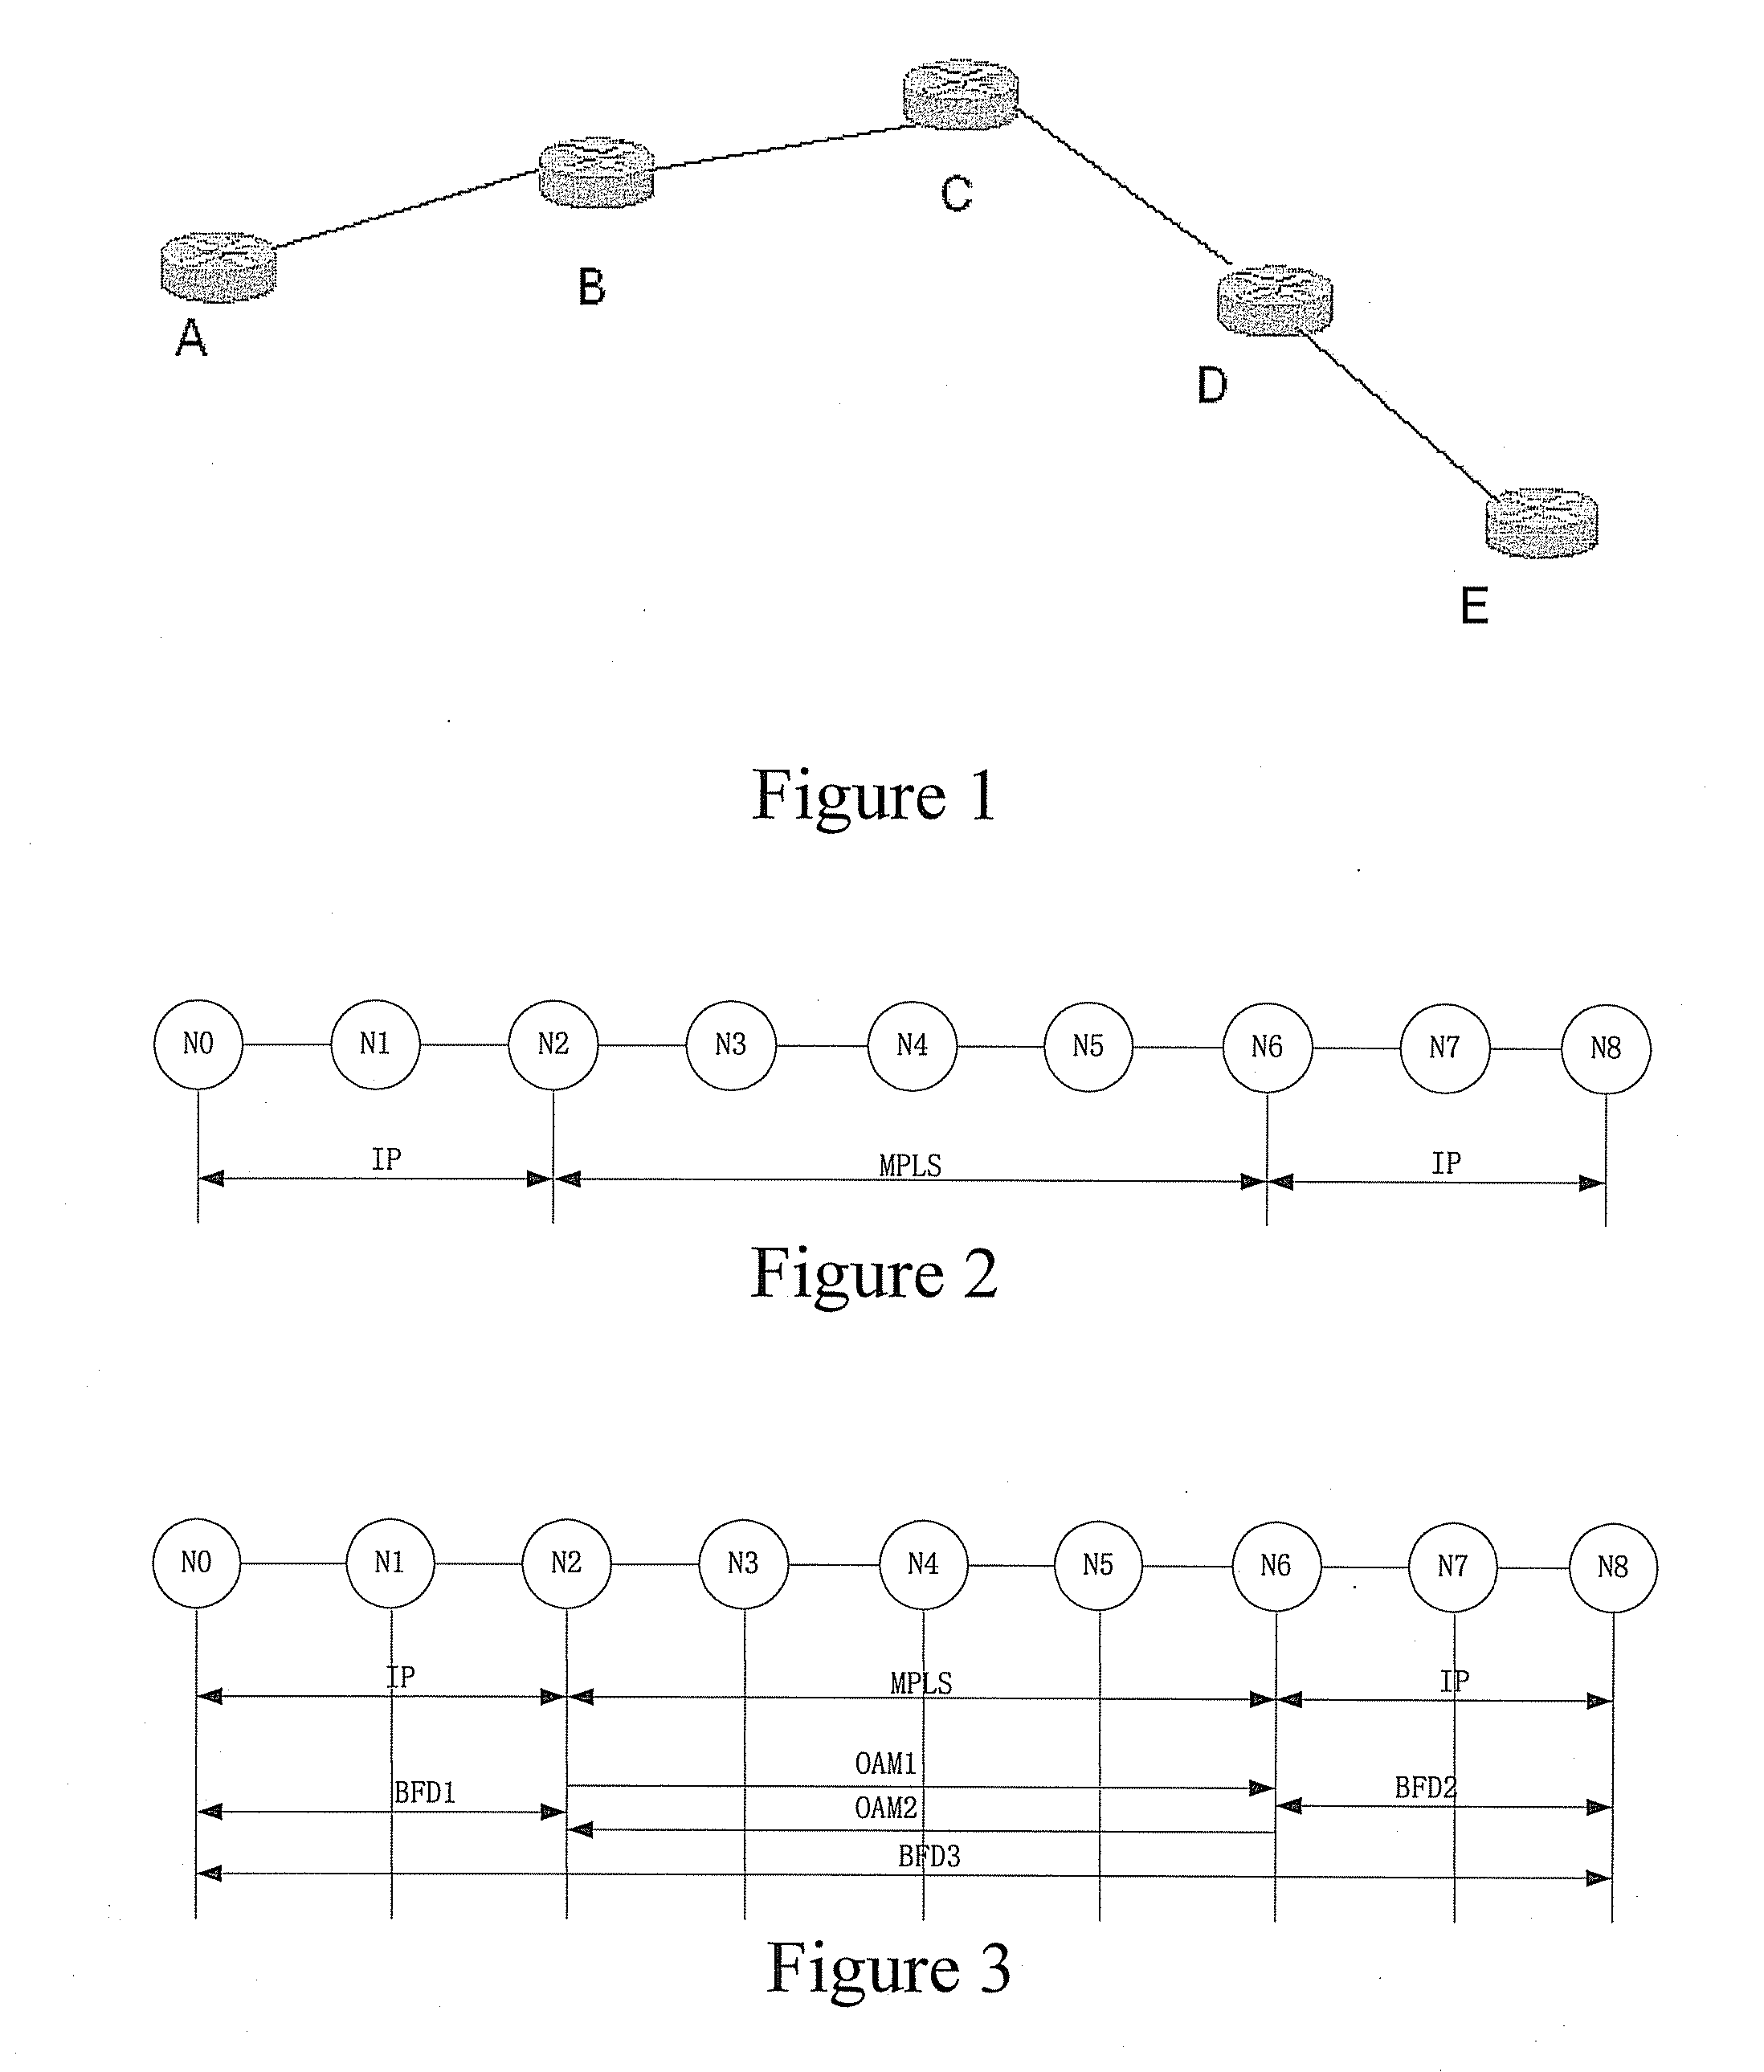 Method and system for detecting link failure between nodes in a hybrid network